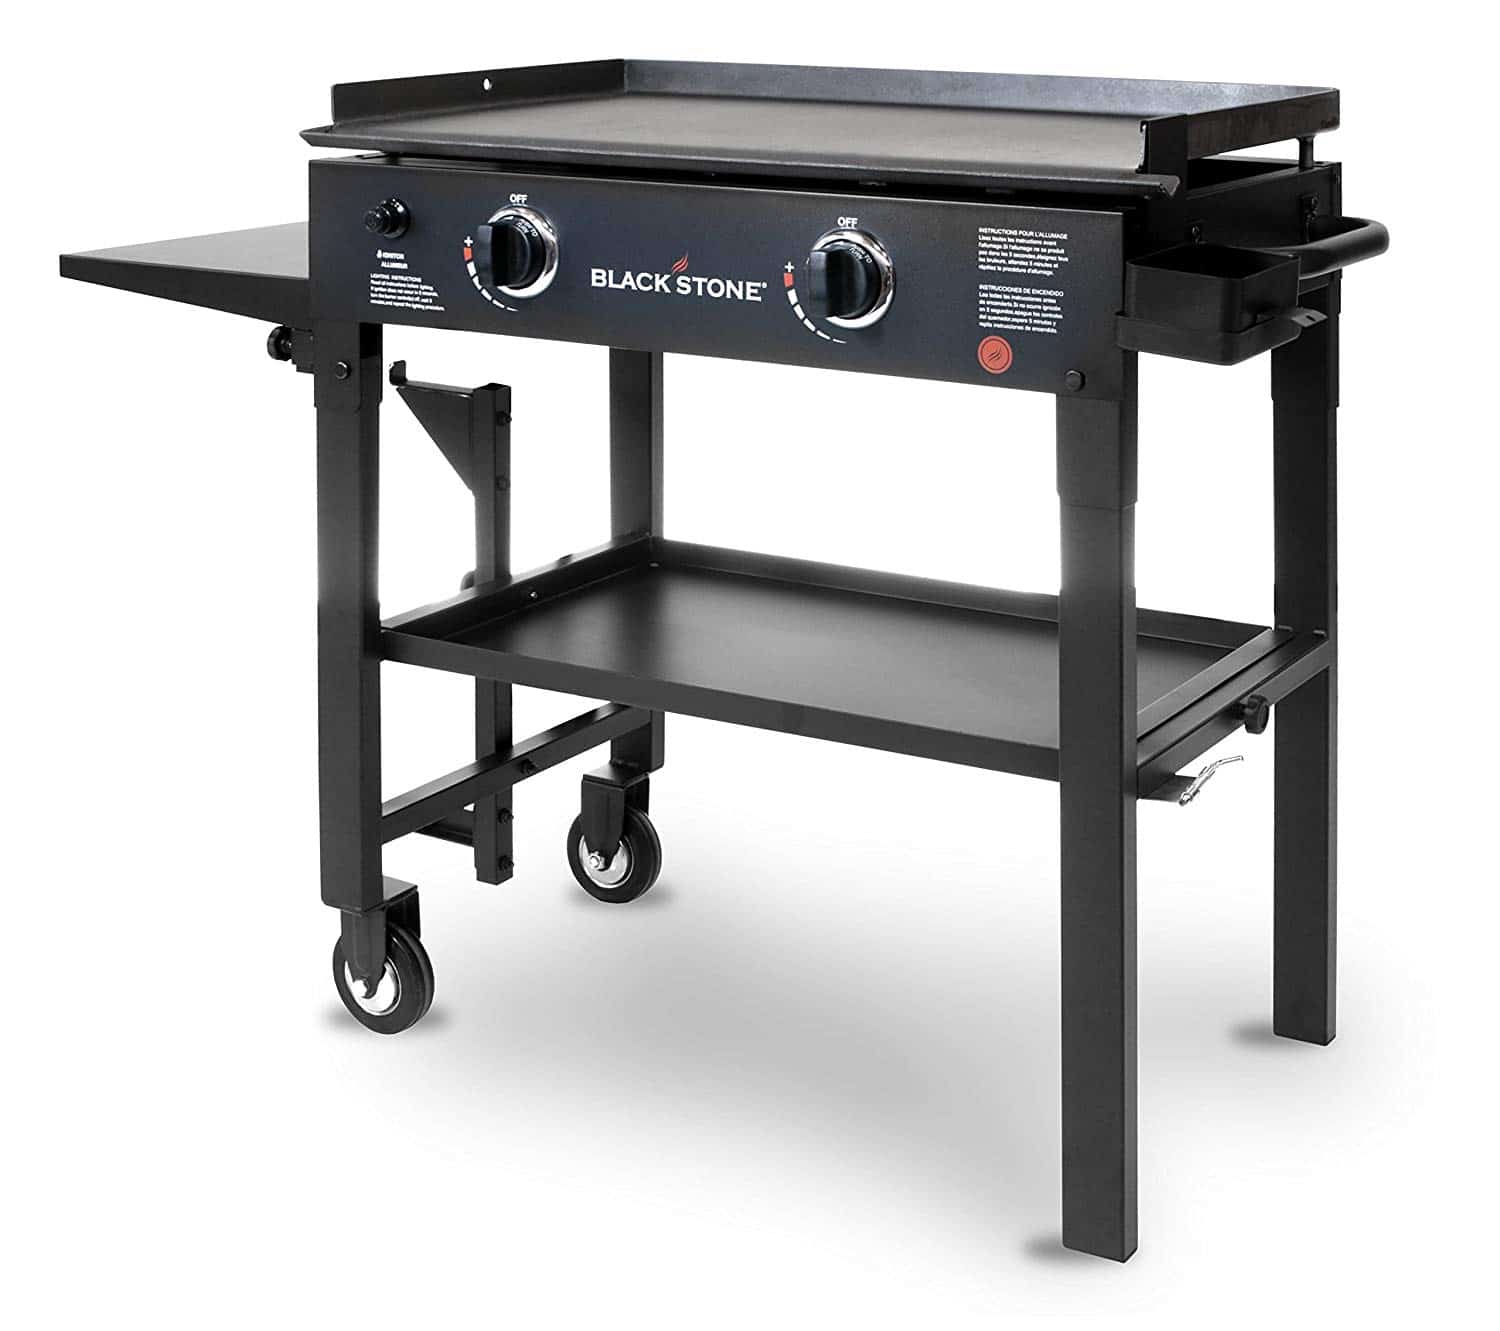 Blackstone 28-inch Griddle Cooking Station